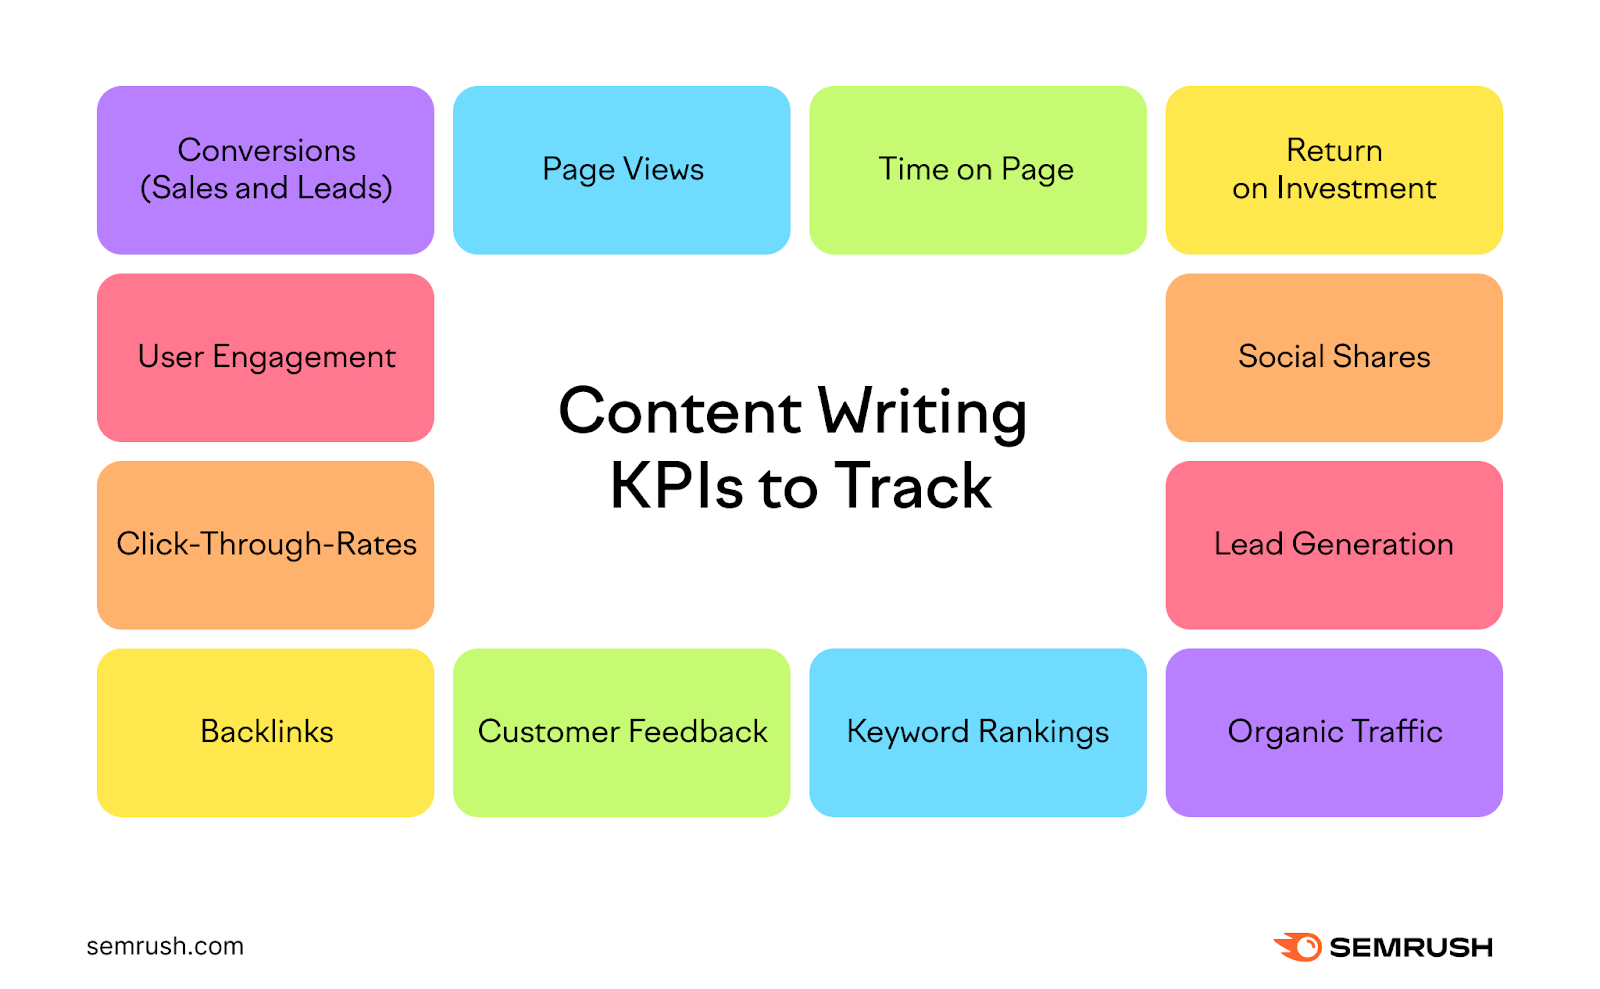 Content writing KPIs to track are conversions of sales and leads, page views, time on page, return on investment, social shares, lead generation, organic traffic, keyword rankings, customer feedback, backlinks, click-through-rates, user engagement.